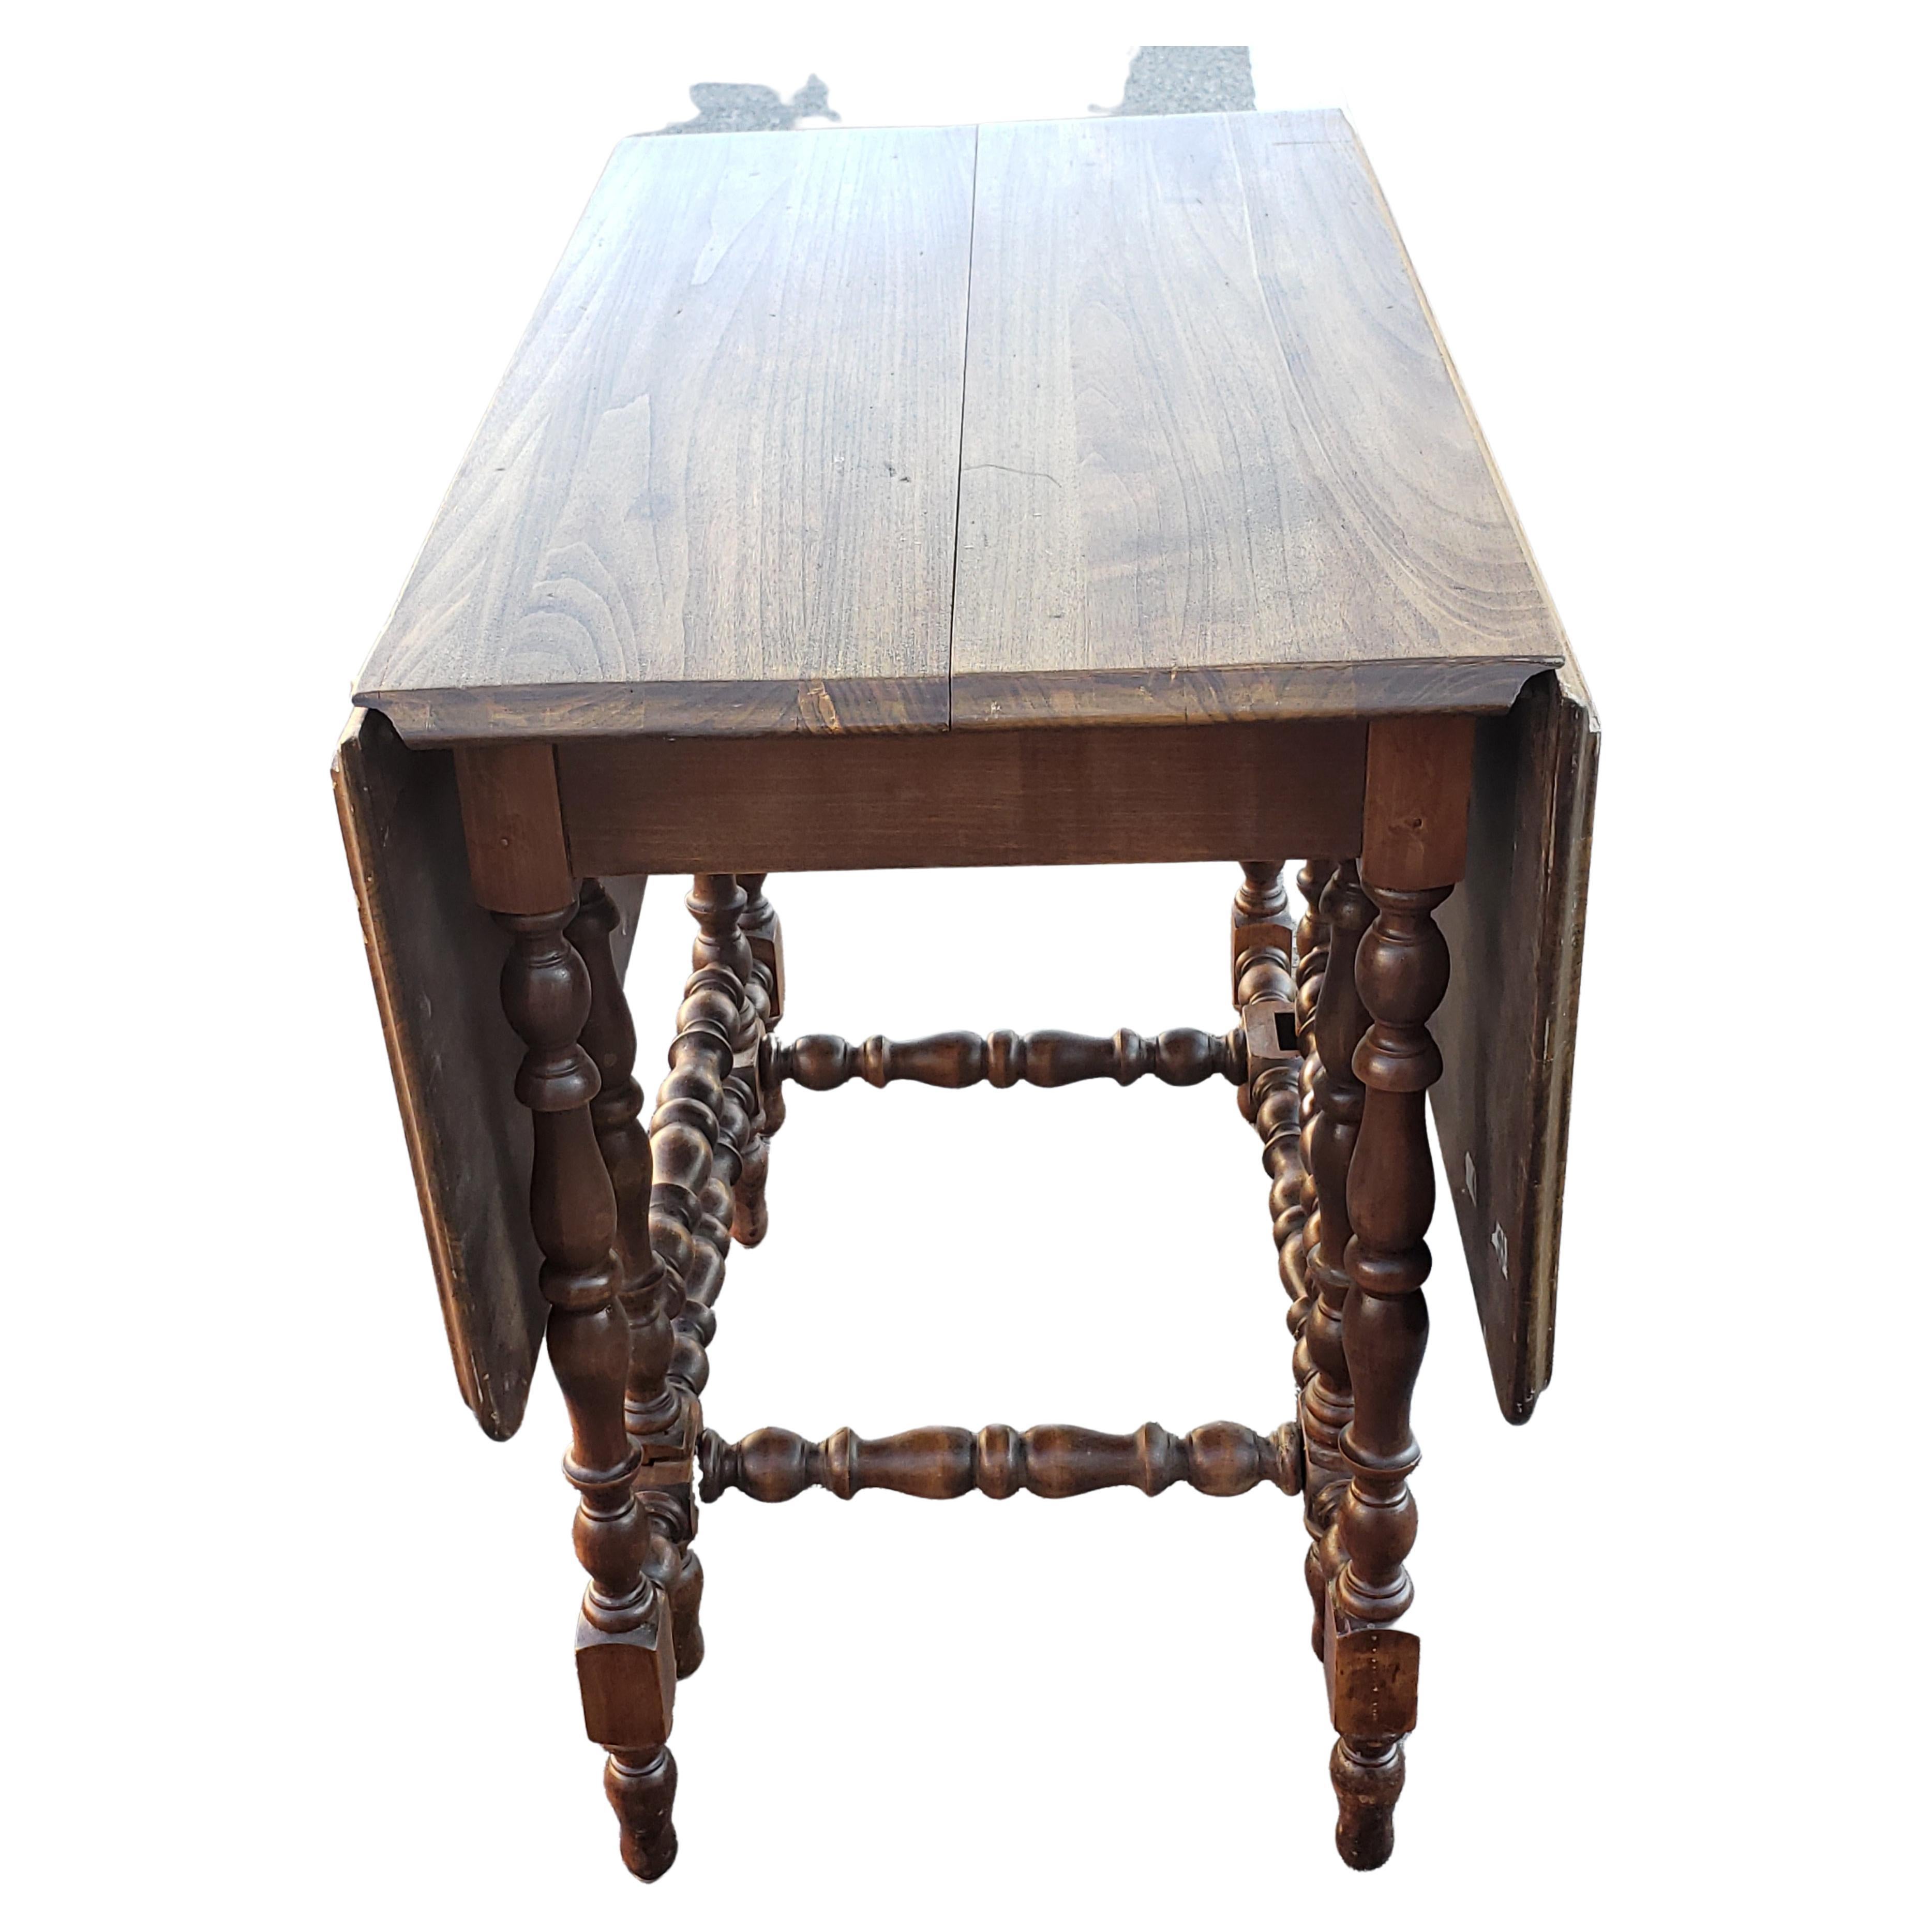 Awesome antique gateleg drop leaf table, amazing turned legs,, wonderful old patina! Perfect for a farmhouse. Made walnut wood and it is very old. This item is in good vintage condition with some wear appropriate with age and normal use. Perfect for